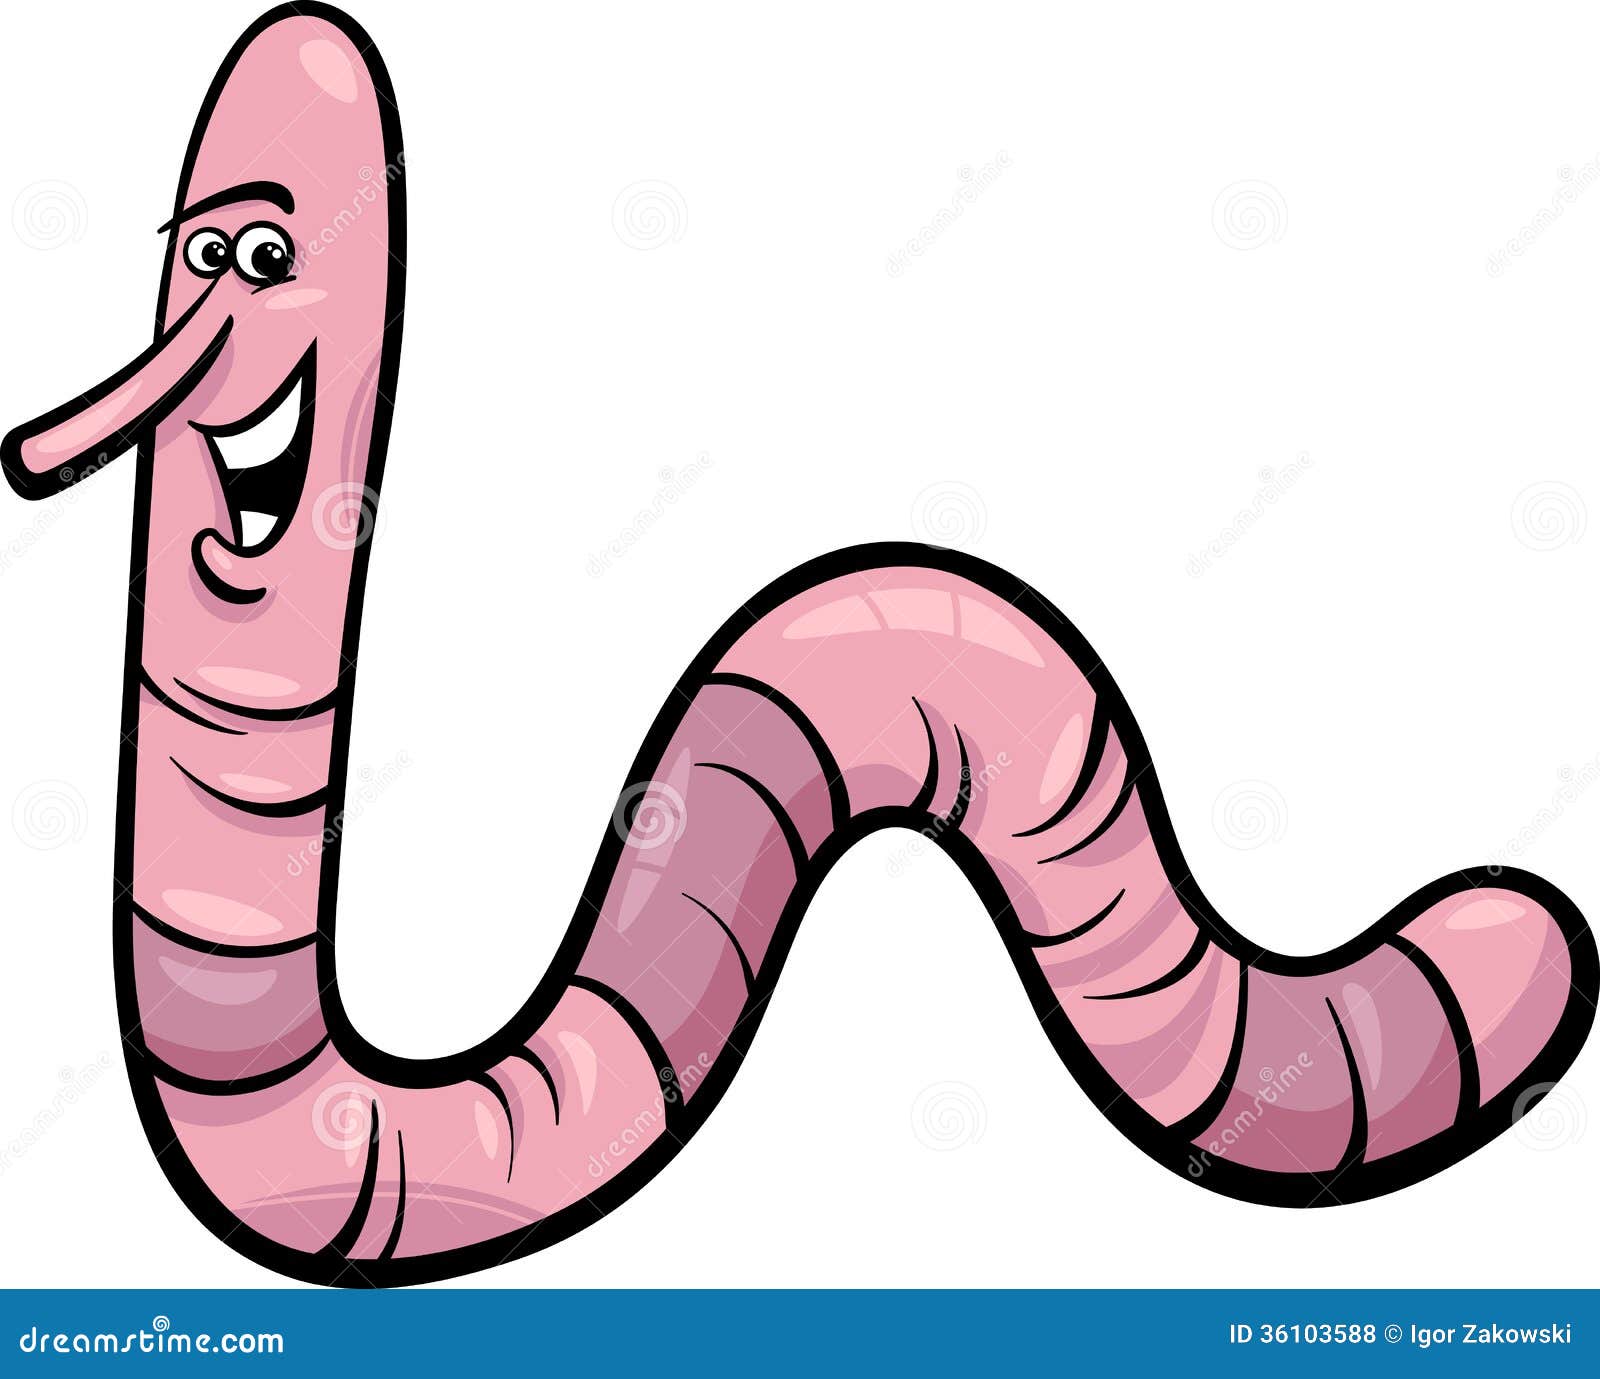 funny worm clipart - photo #11